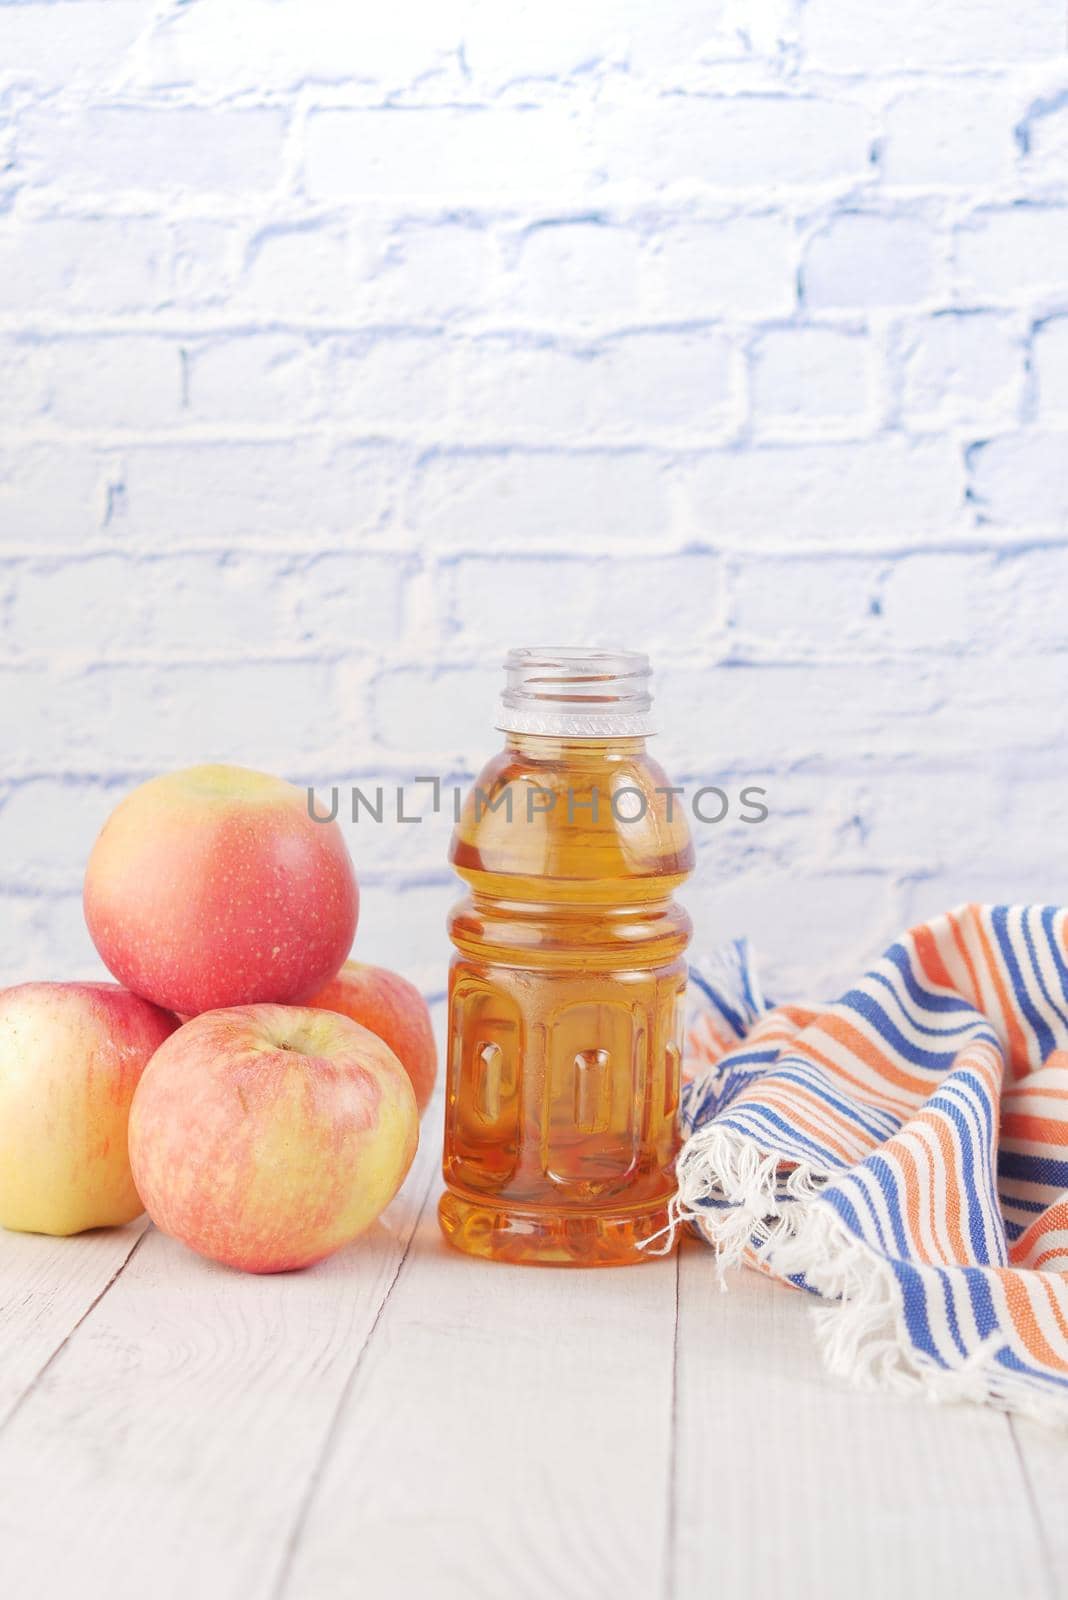 fresh apples and bottle of juice on table by towfiq007